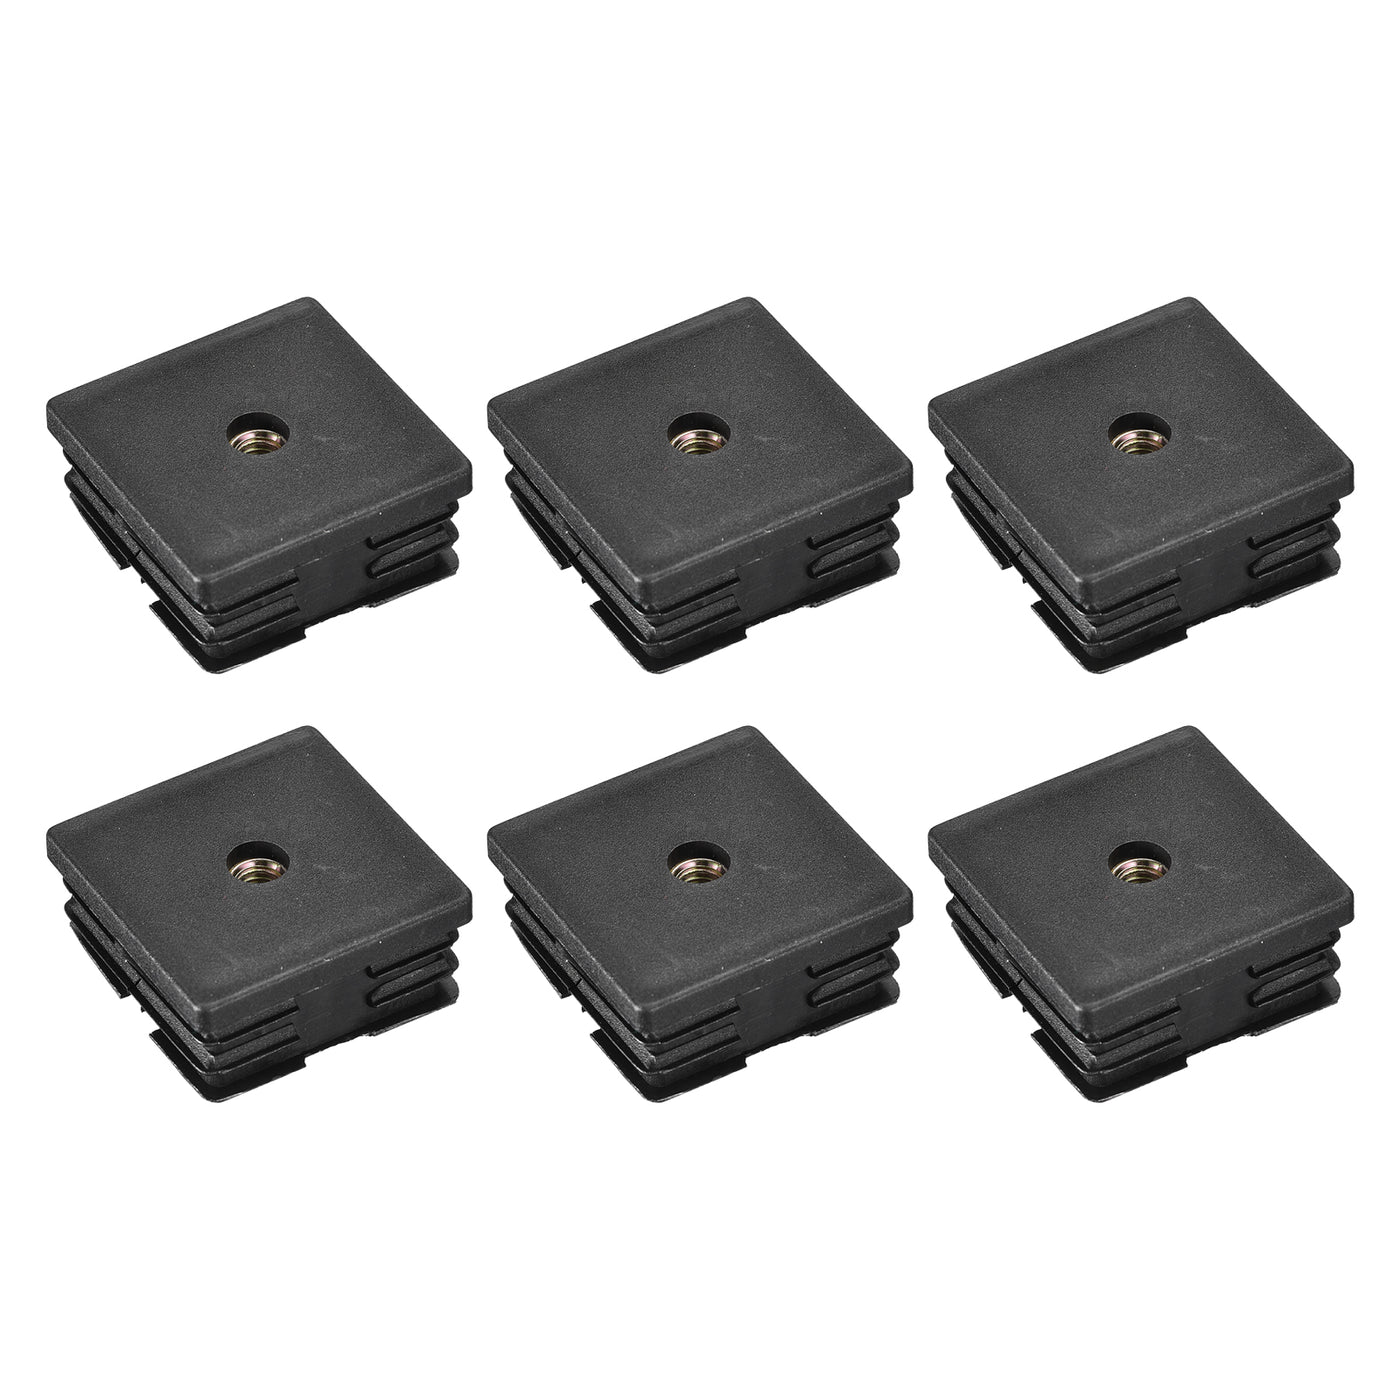 uxcell Uxcell 6Pcs 1.97"x1.97" Caster Insert with Thread, Square M8 Thread for Furniture